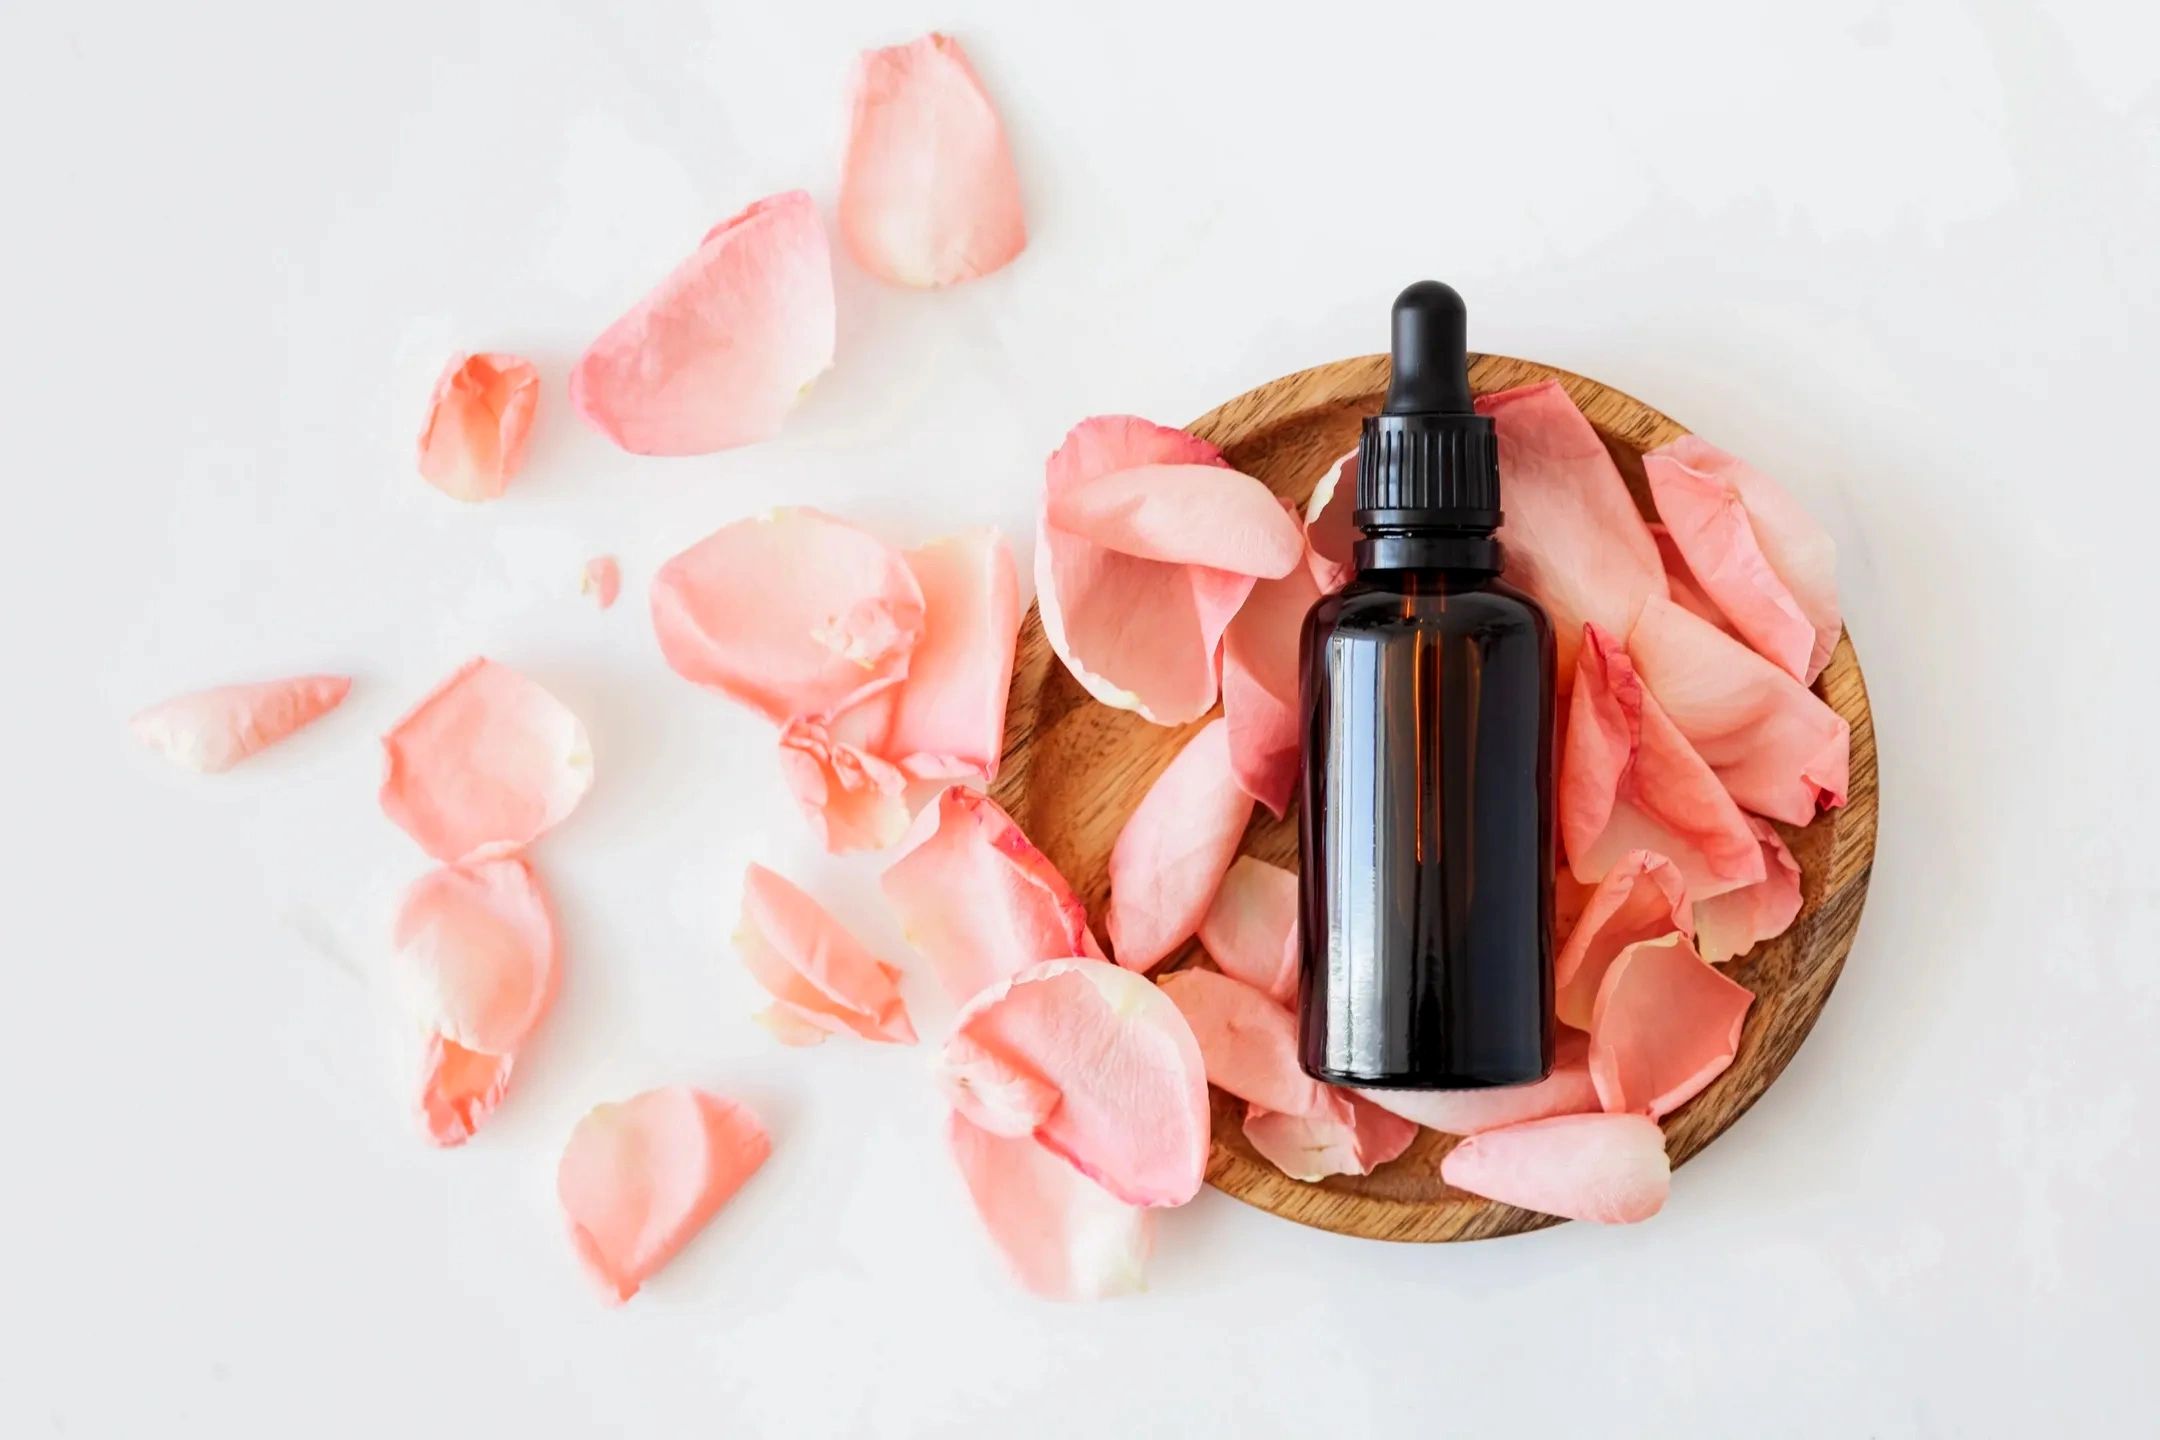 Specialty face oil surrounded by rose petals.